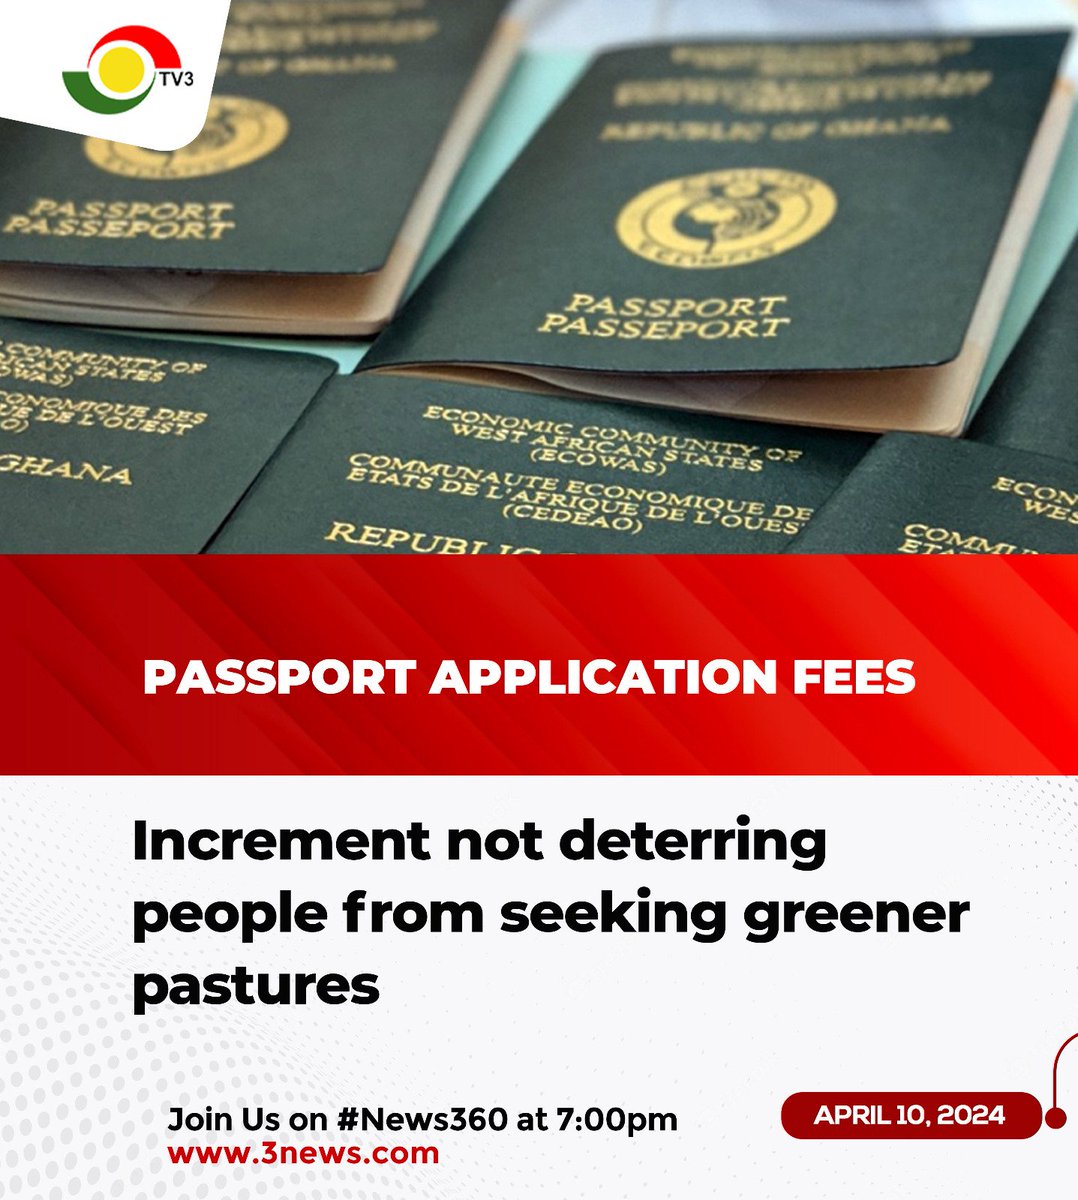 More passport applicants despite increment in fees. We'll give you more details on #News360.

#3NewsGH